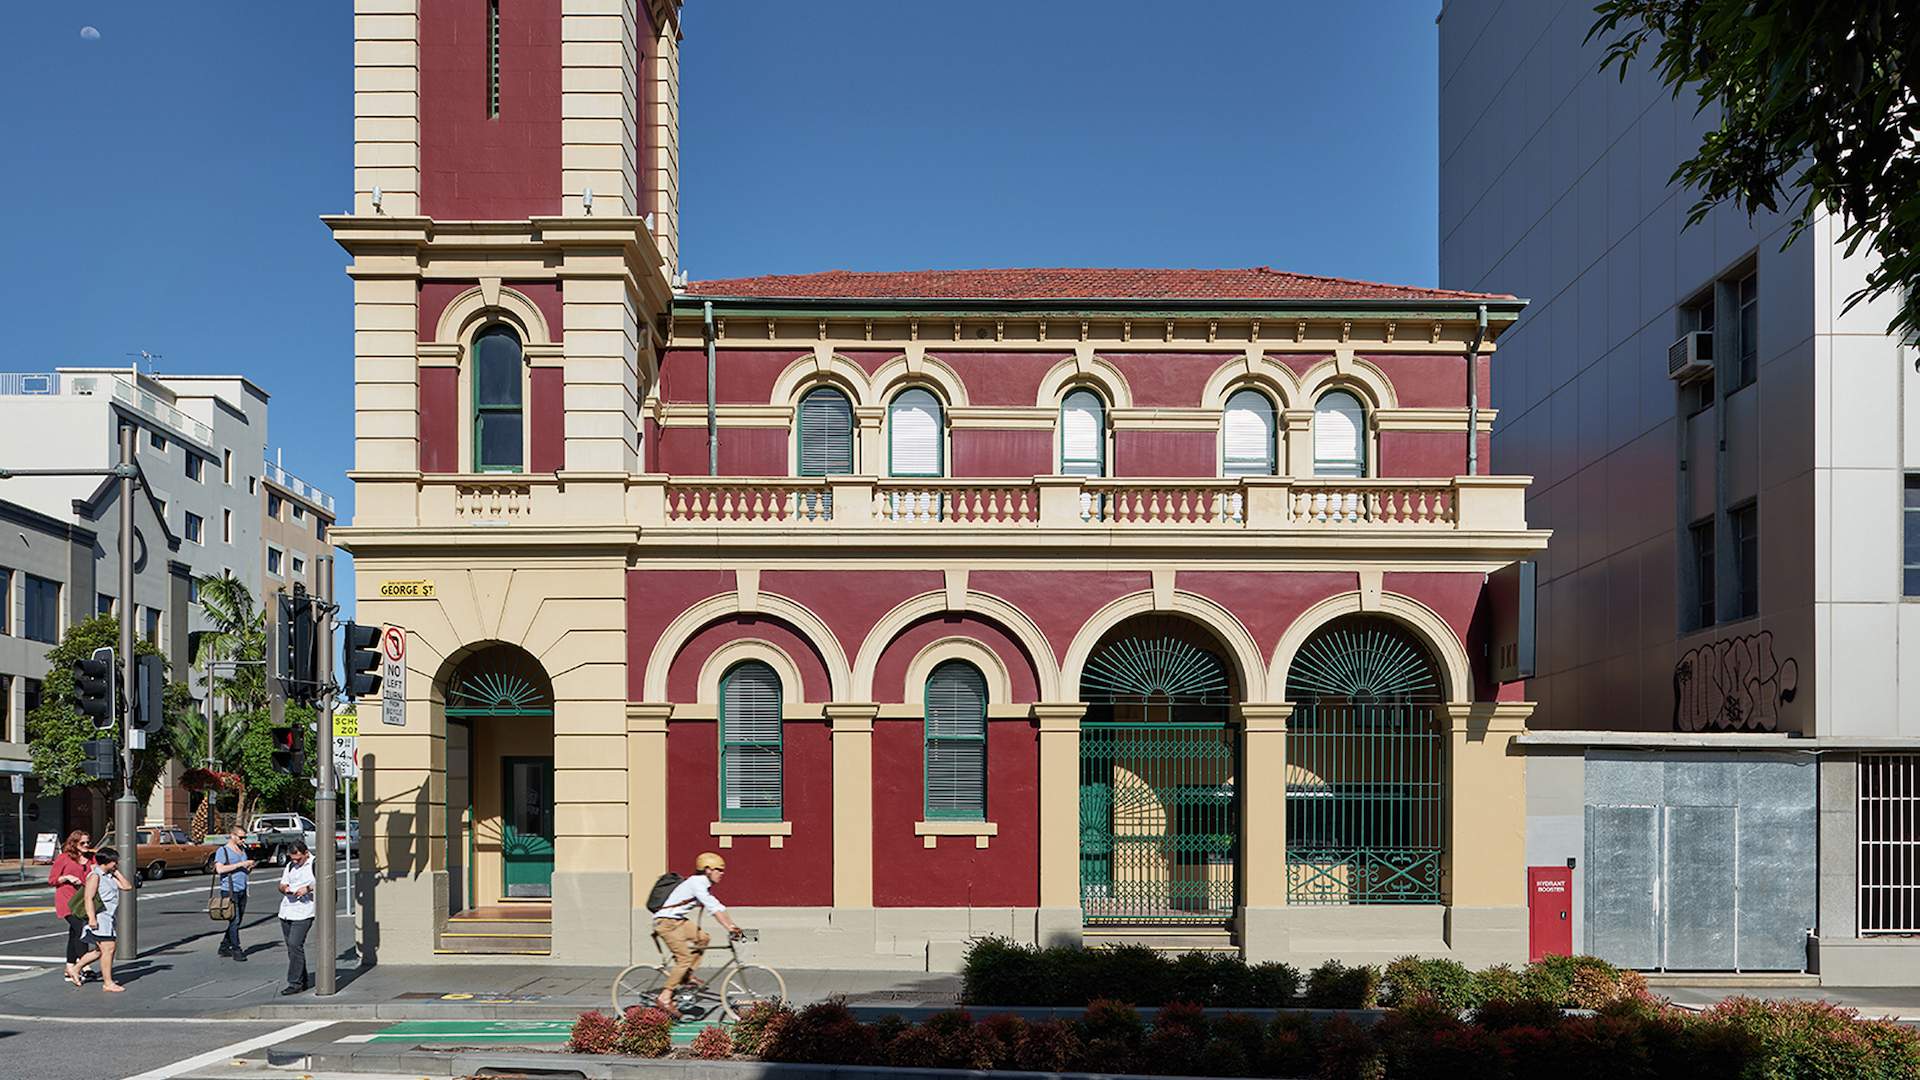 The Redfern Post Office Will Be Transformed Into an Aboriginal and Torres Strait Islander Cultural Hub